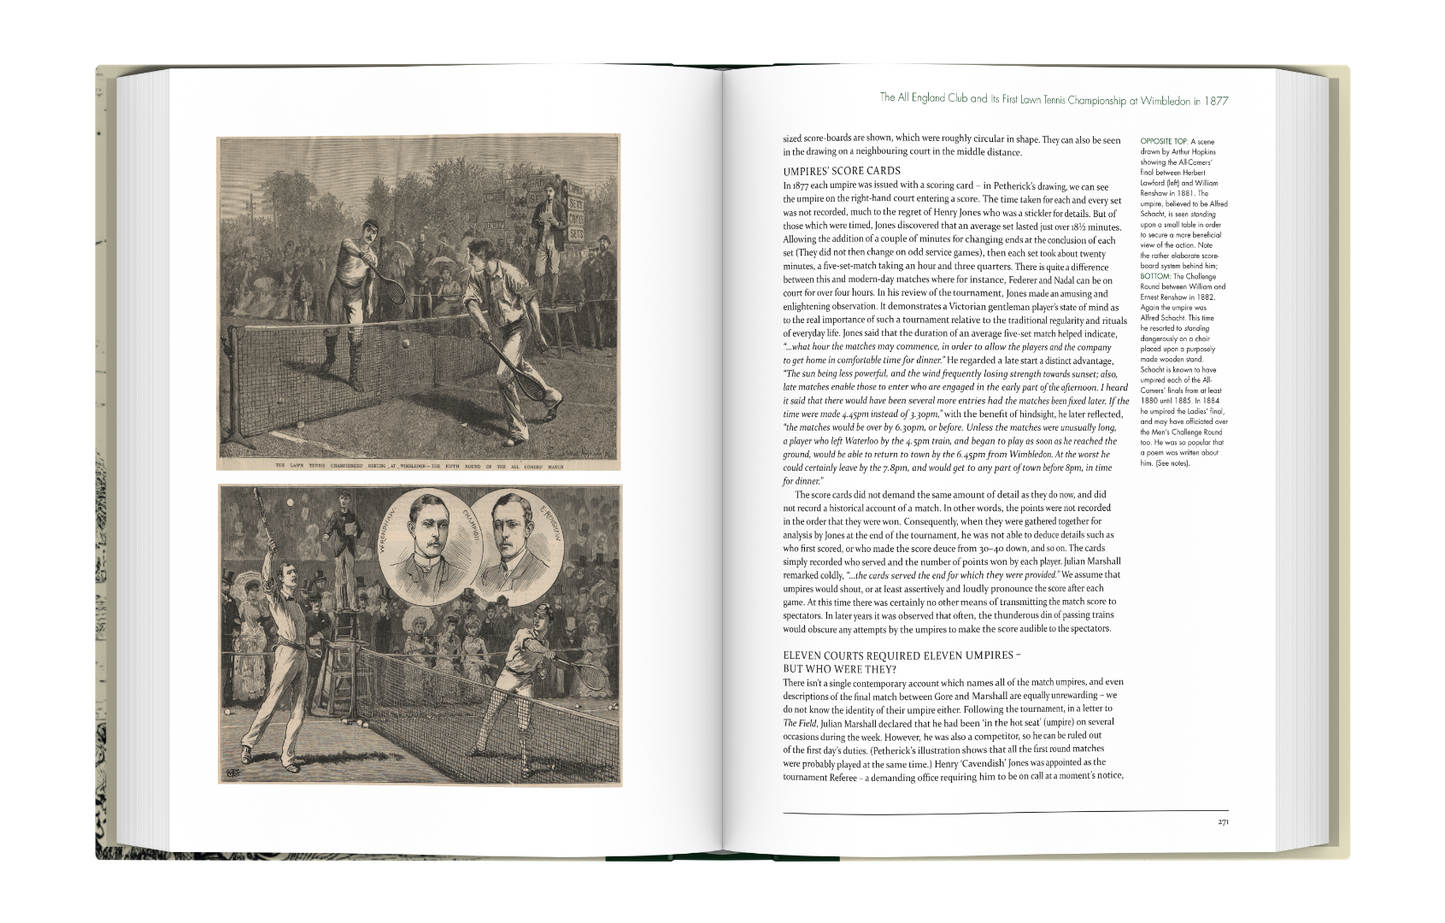 The Birth of Lawn Tennis - 2nd edition